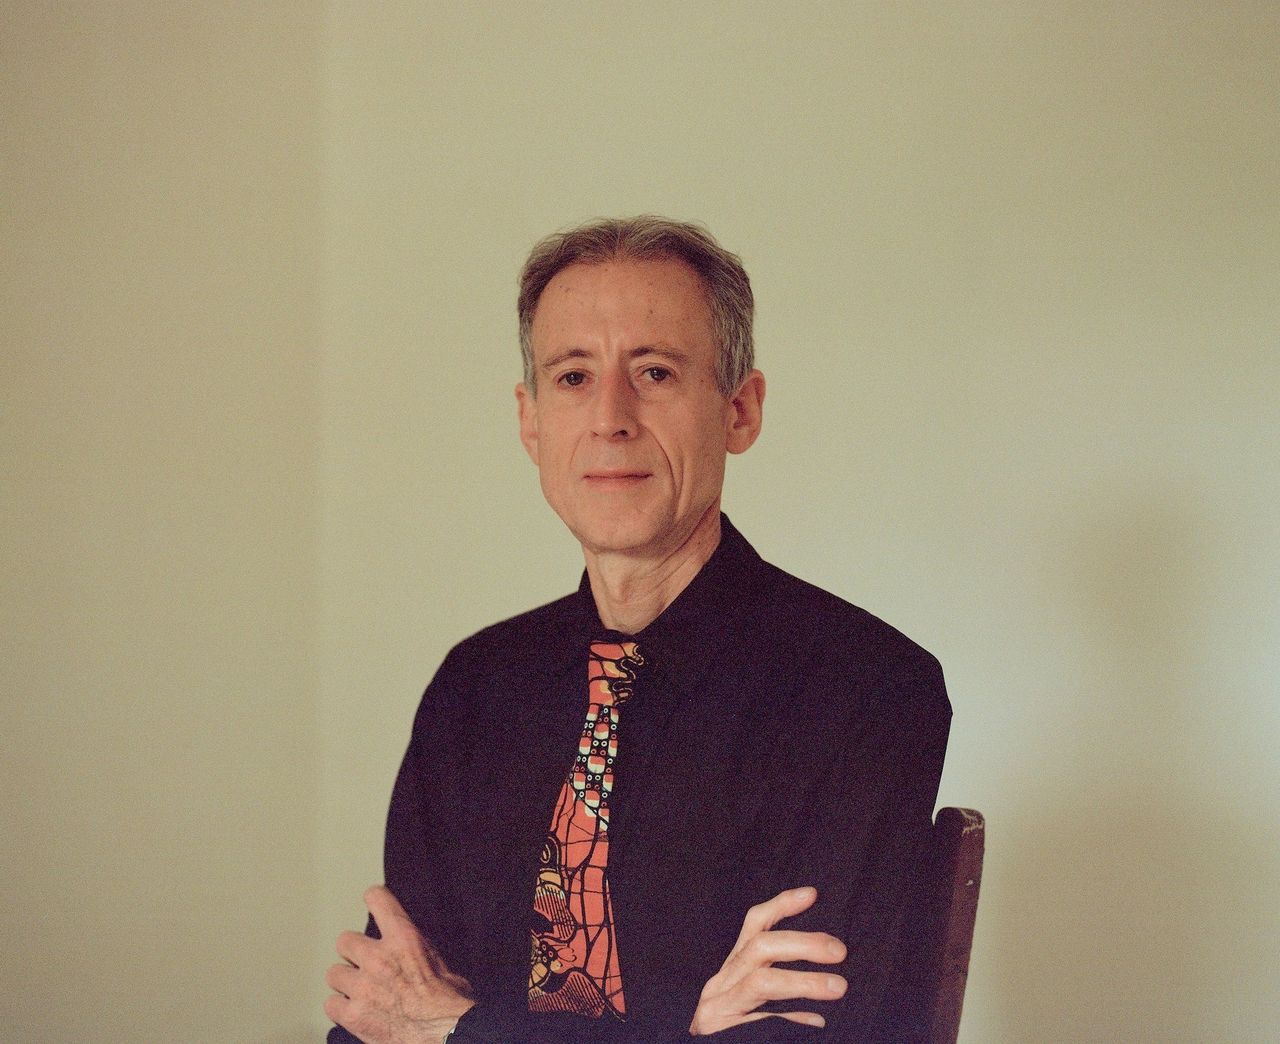 Peter Tatchell has suffered more than 300 assaults during his time as an LGBT and human rights campaigner.